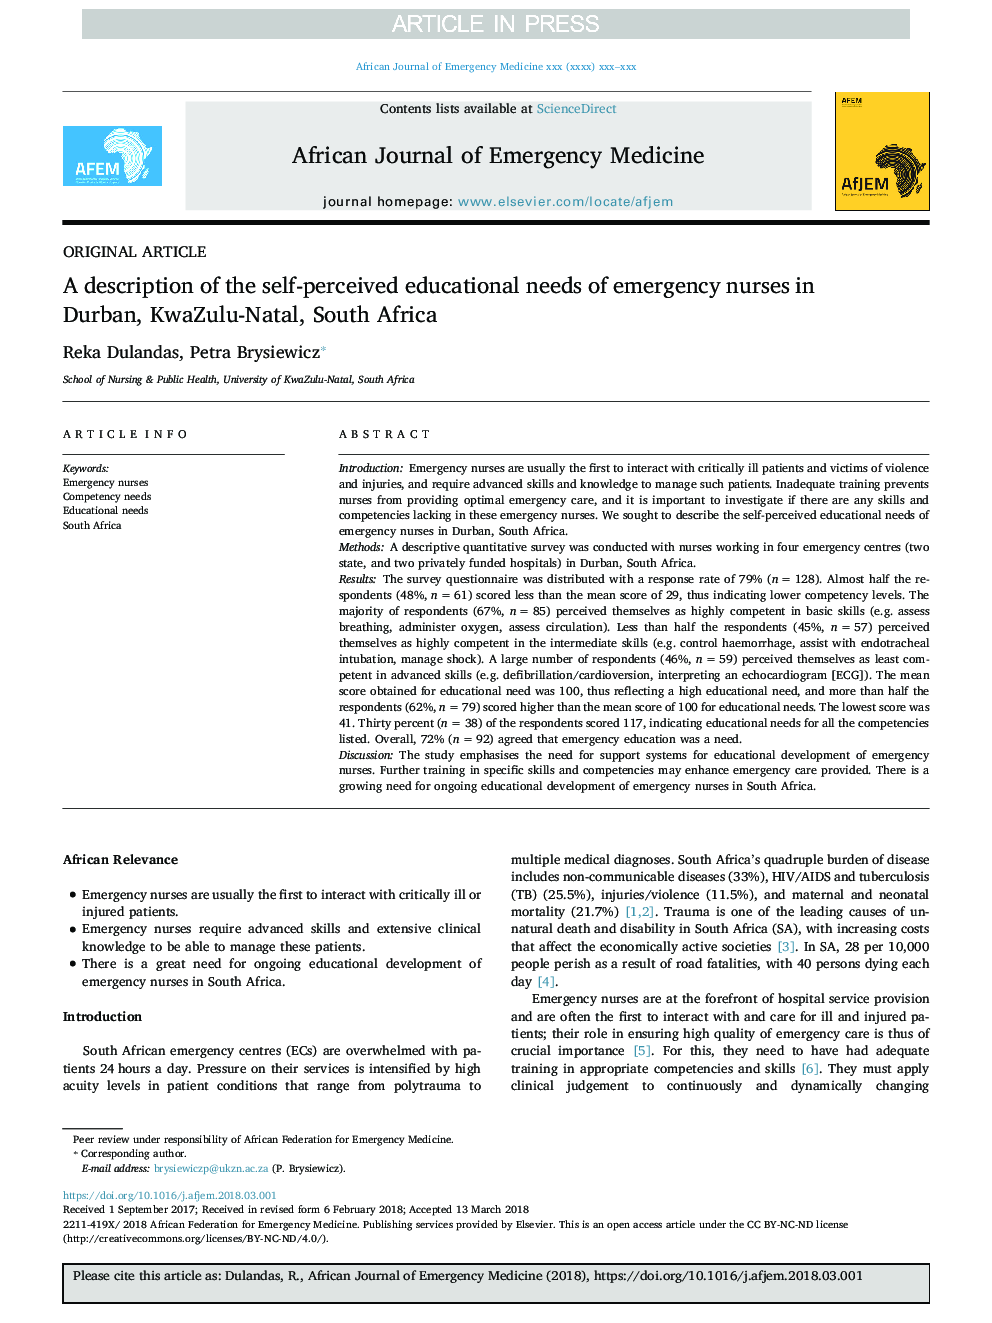 A description of the self-perceived educational needs of emergency nurses in Durban, KwaZulu-Natal, South Africa